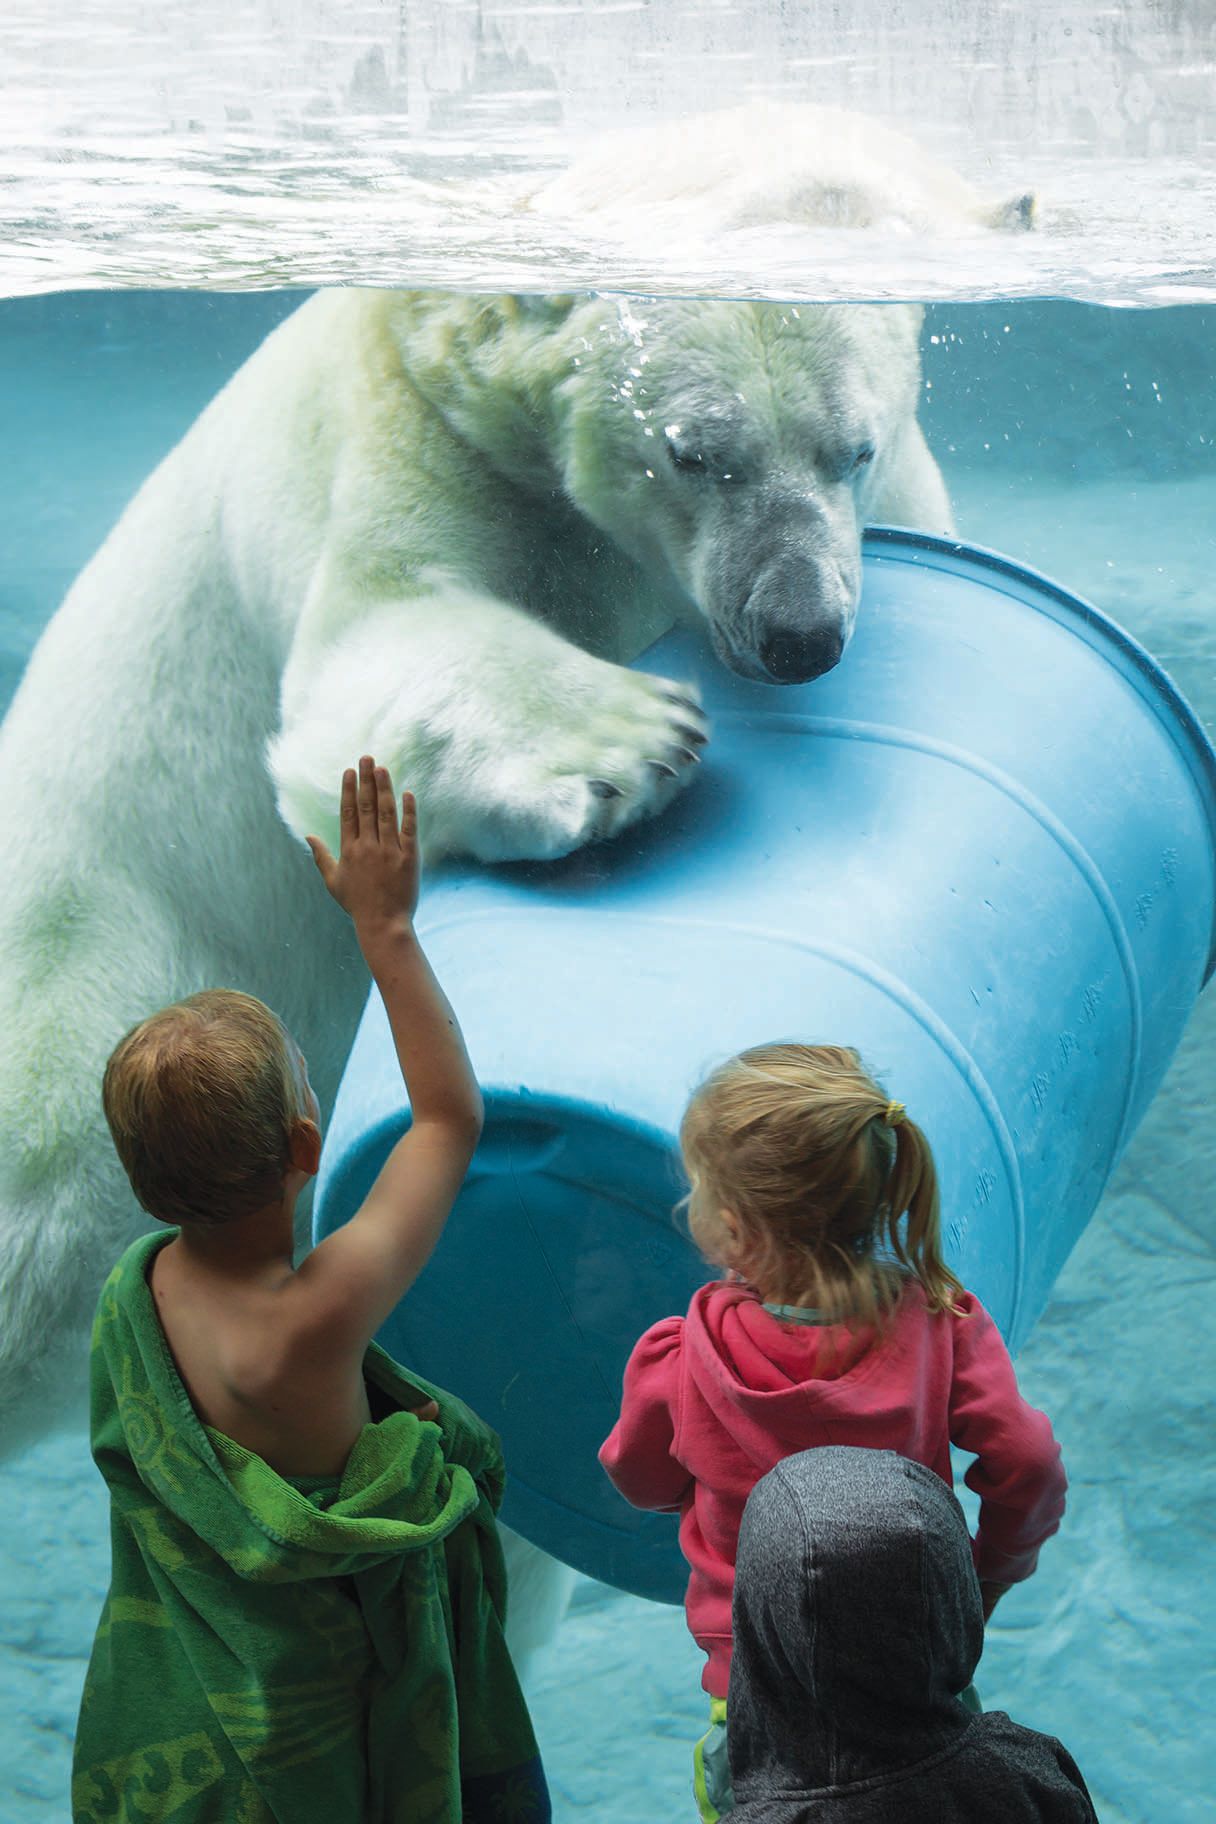 Two small children watching through glass as a polar bear swims with a barrel underwater just in front of them. The child on the left has his hand on the glass as though trying to touch the polar bear.